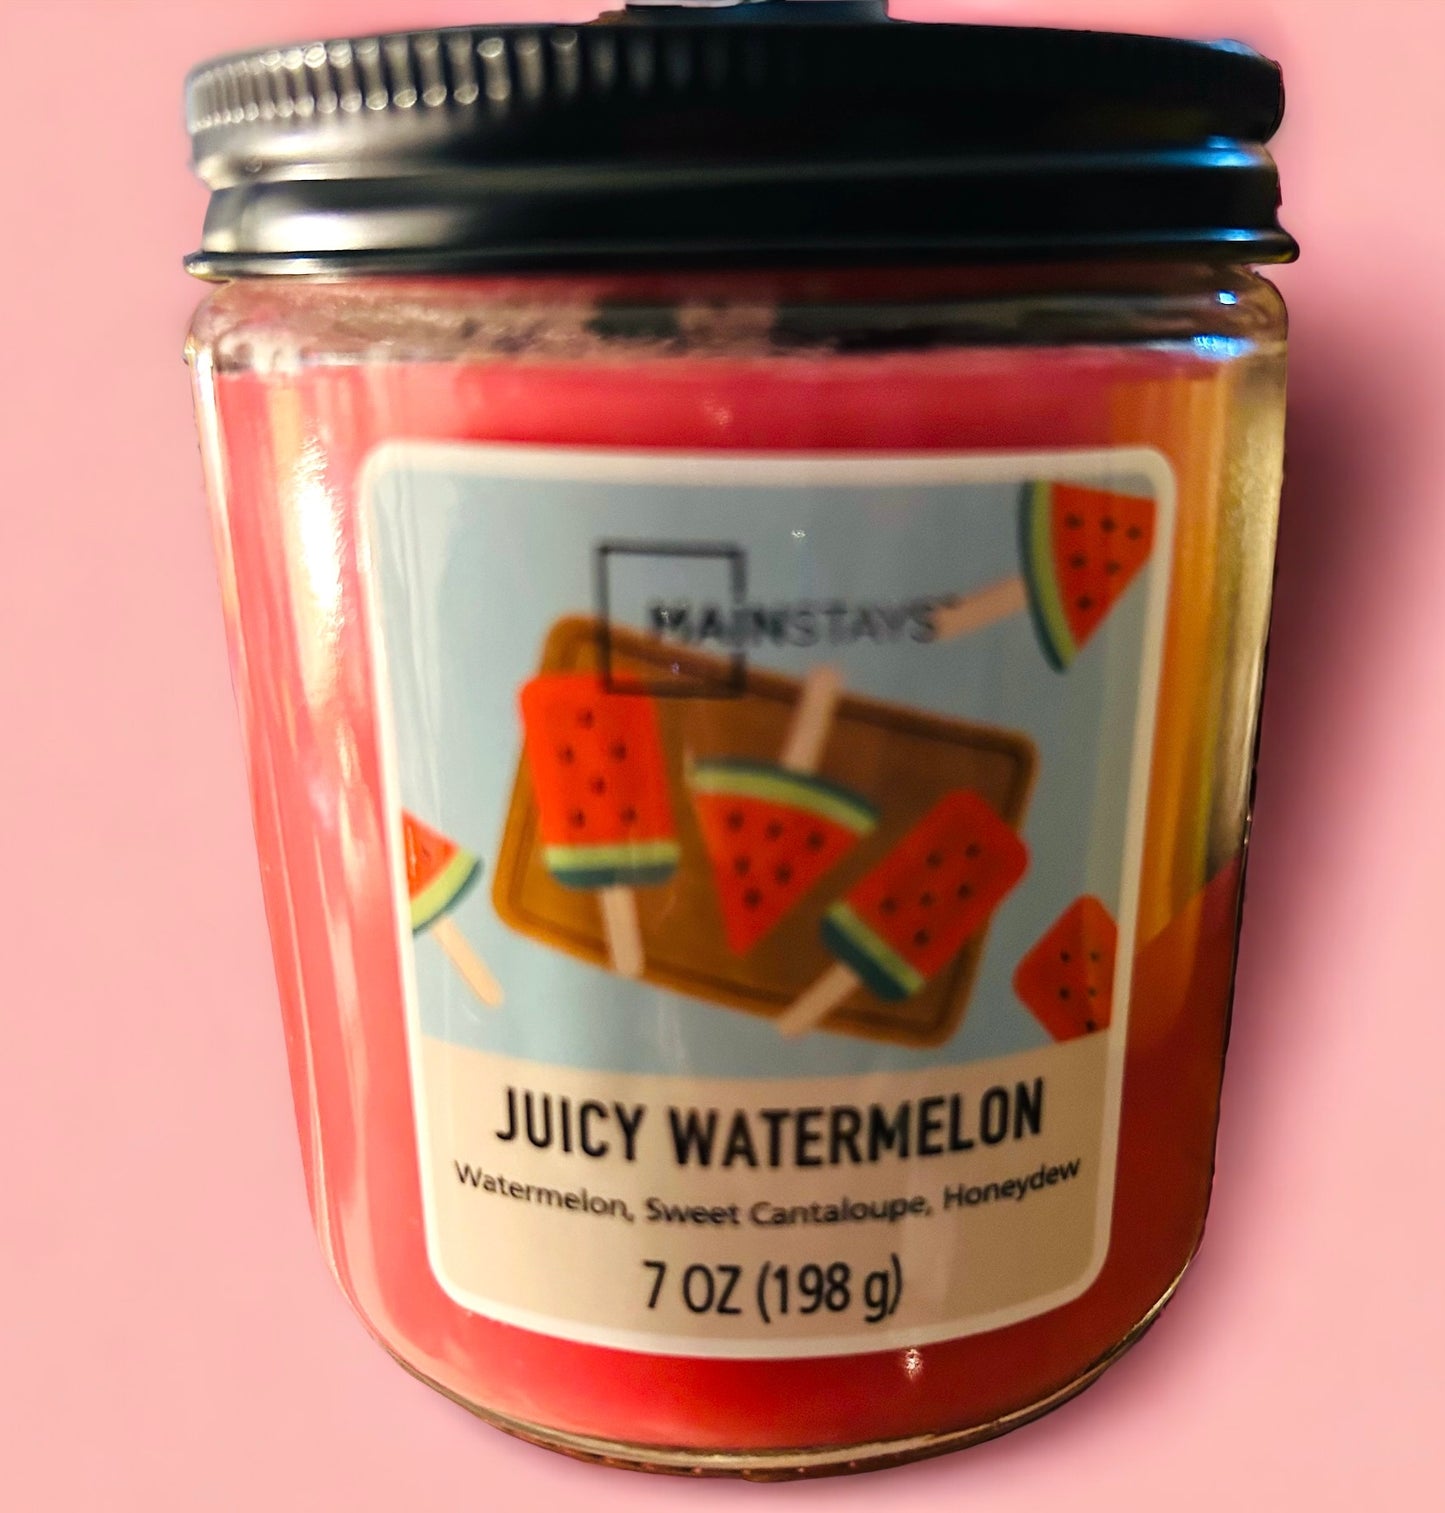 Mainstays Scented Candle Twist Lid, Juicy Watermelon, 7 oz. Single Wick